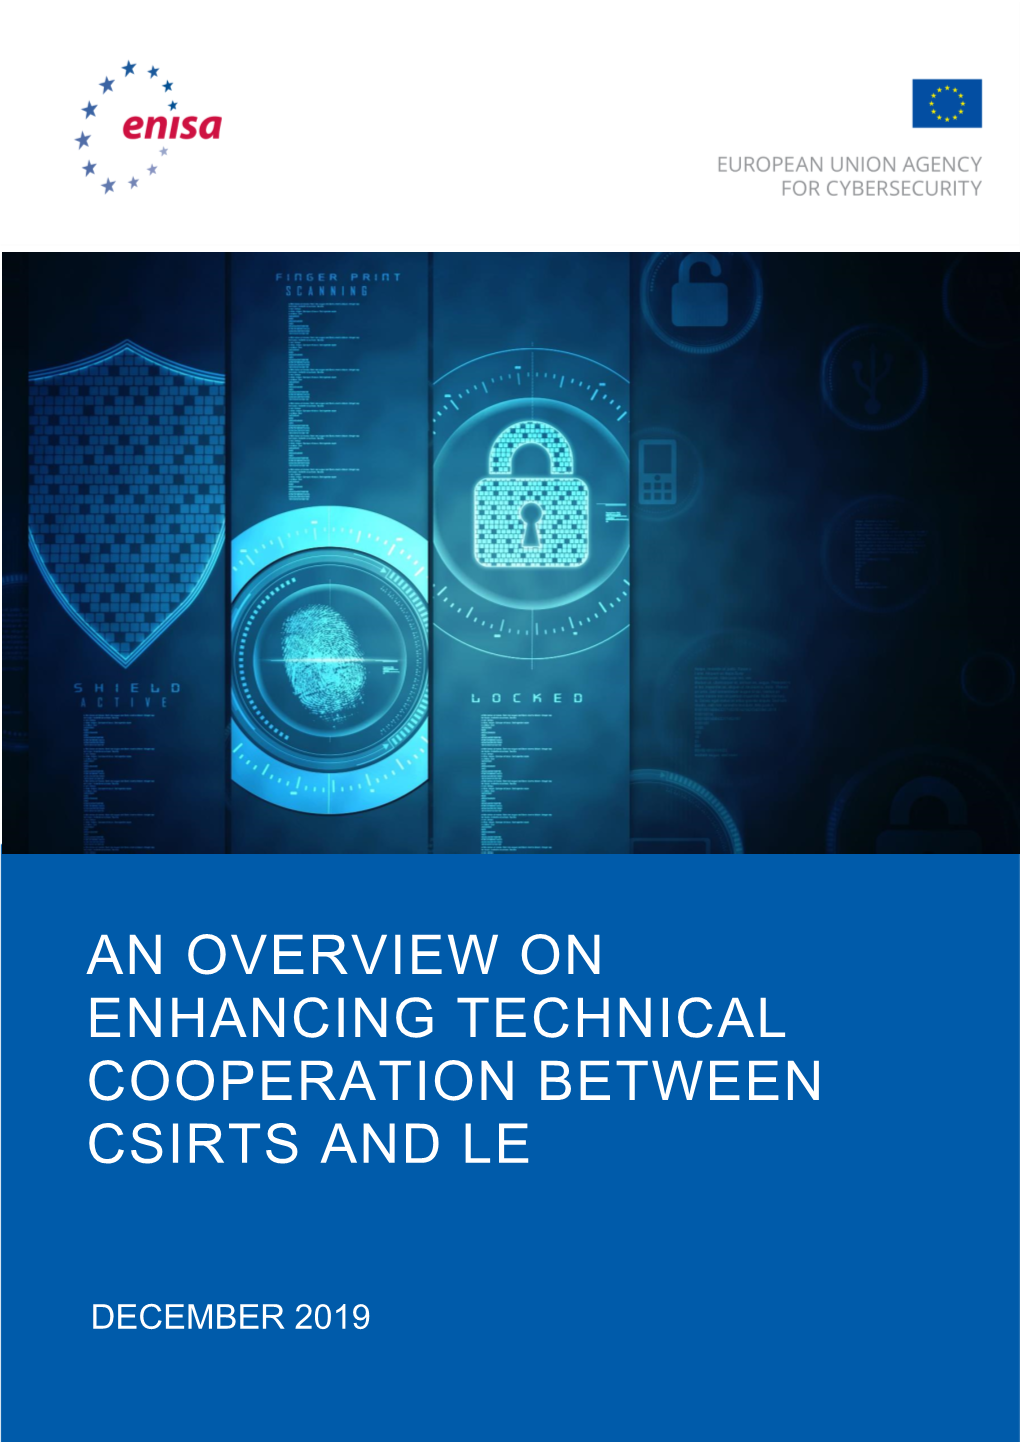 An Overview on Enhancing Technical Cooperation Between Csirts and Le